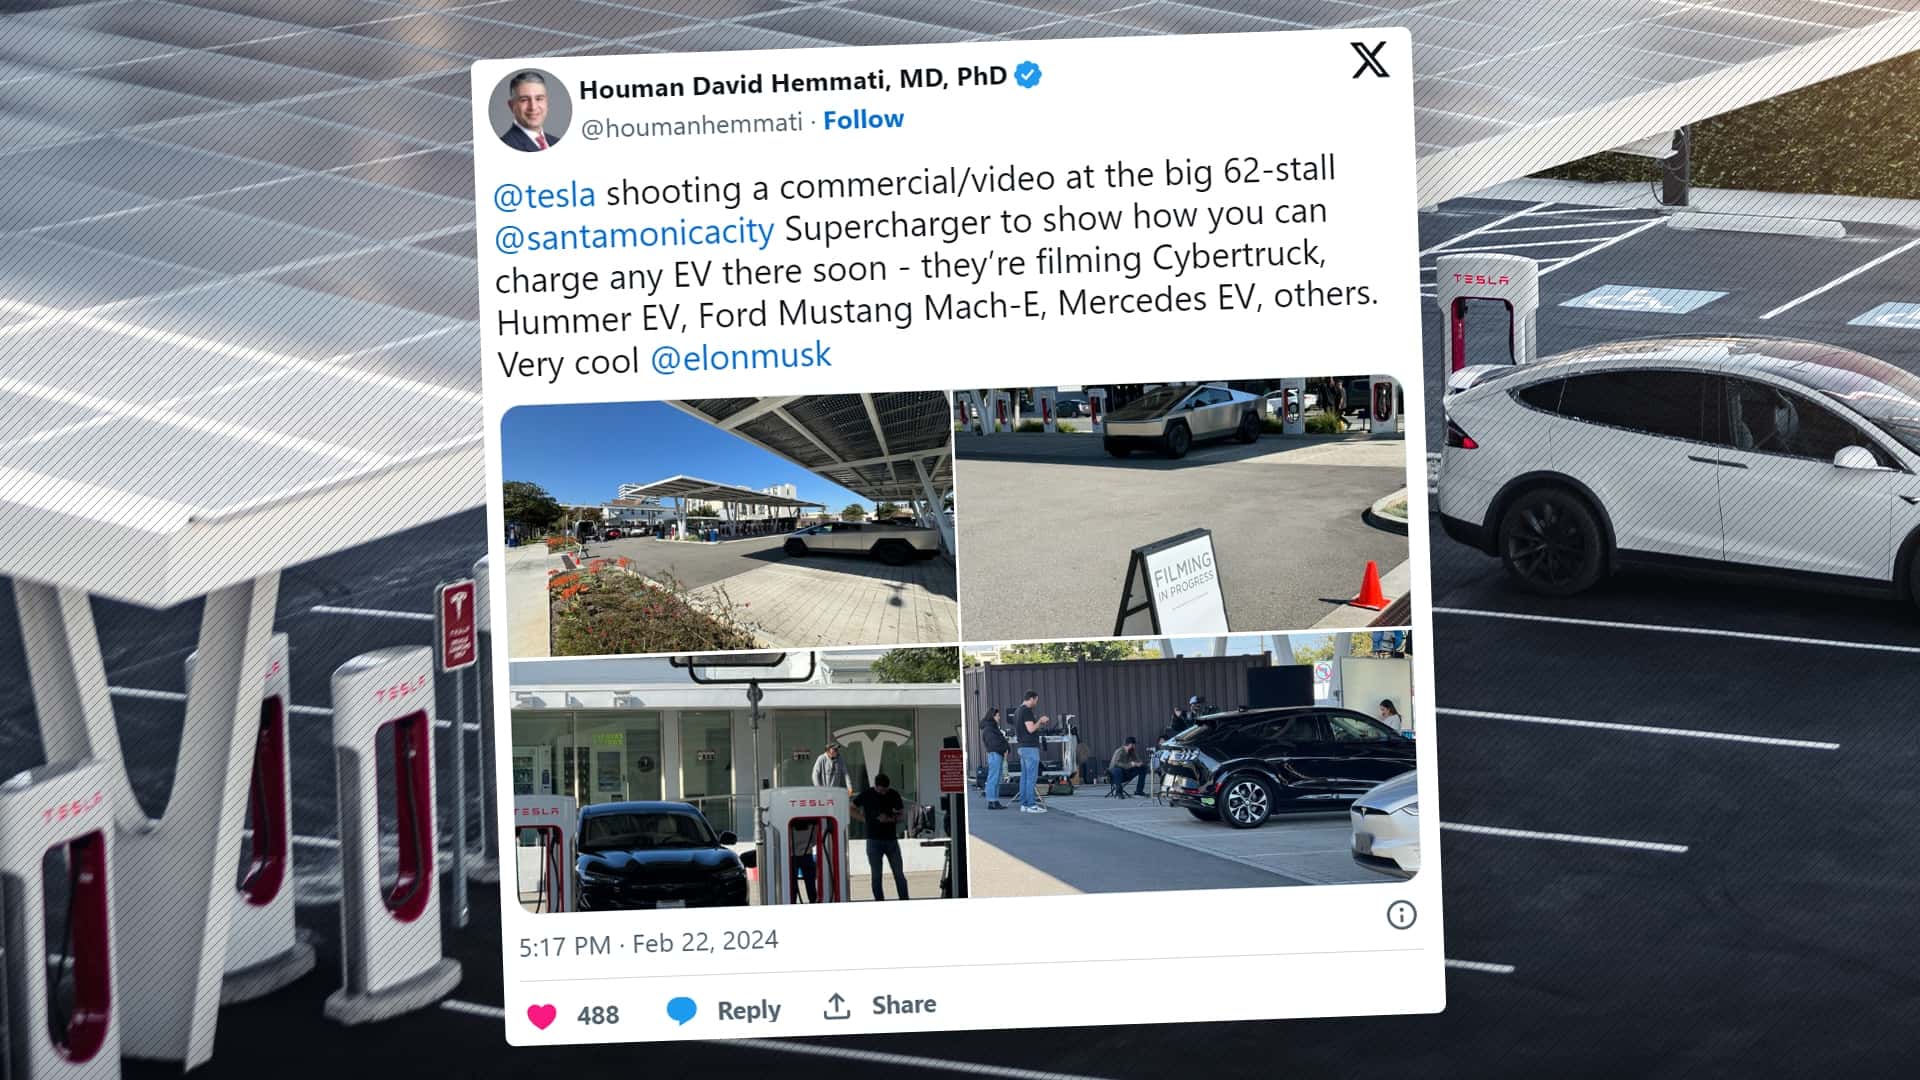 tesla spotted filming at superchargers with non-tesla evs